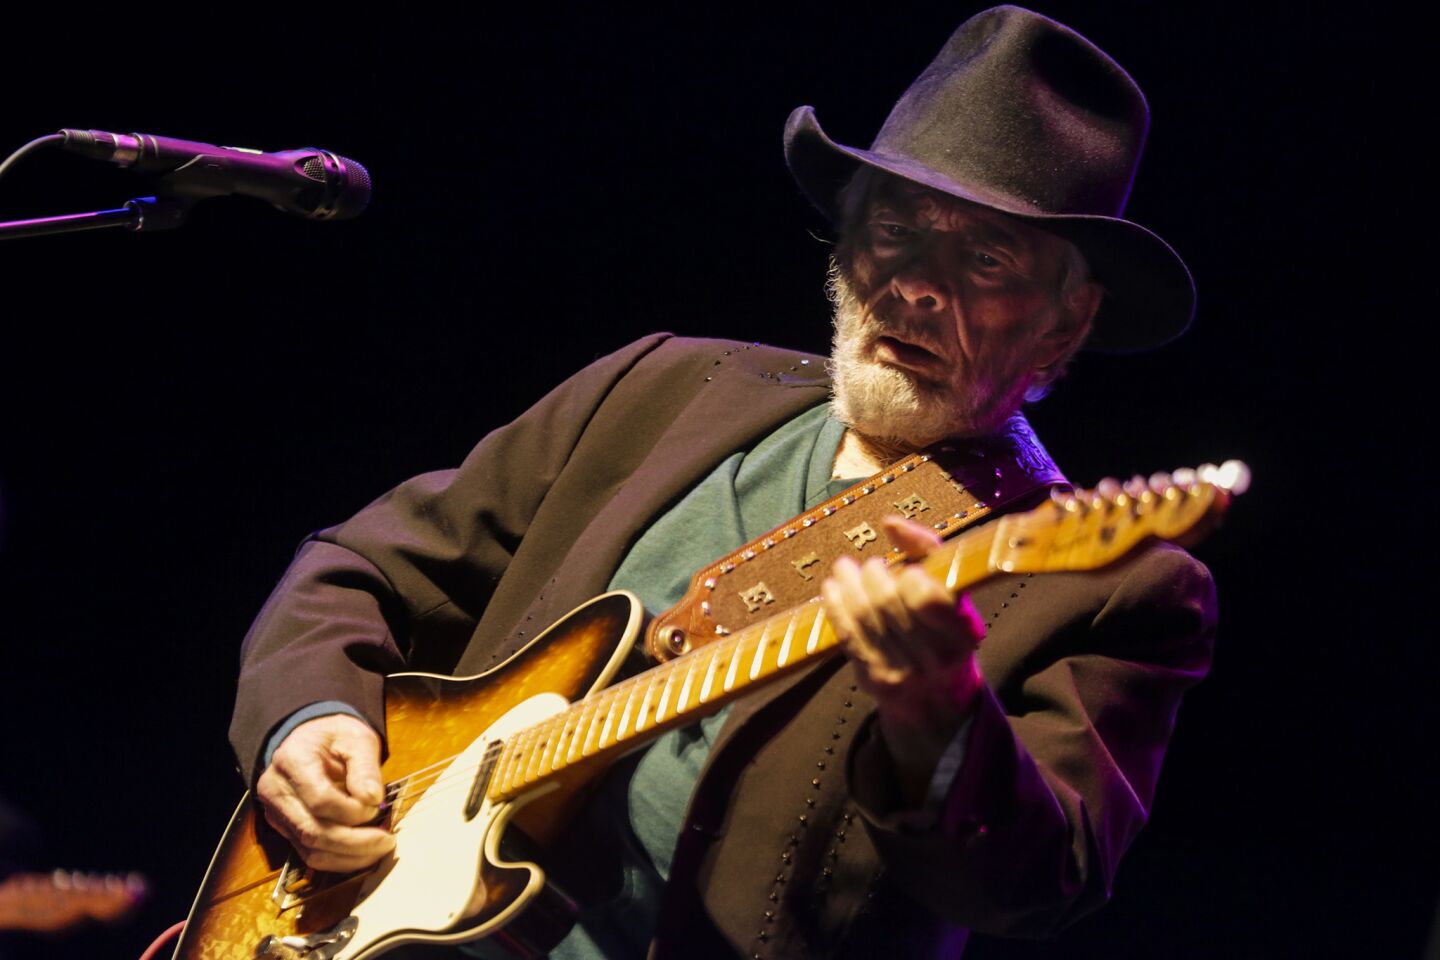 Merle Haggard performs at the Saban Theatre in Beverly Hills on Feb. 11, 2016.